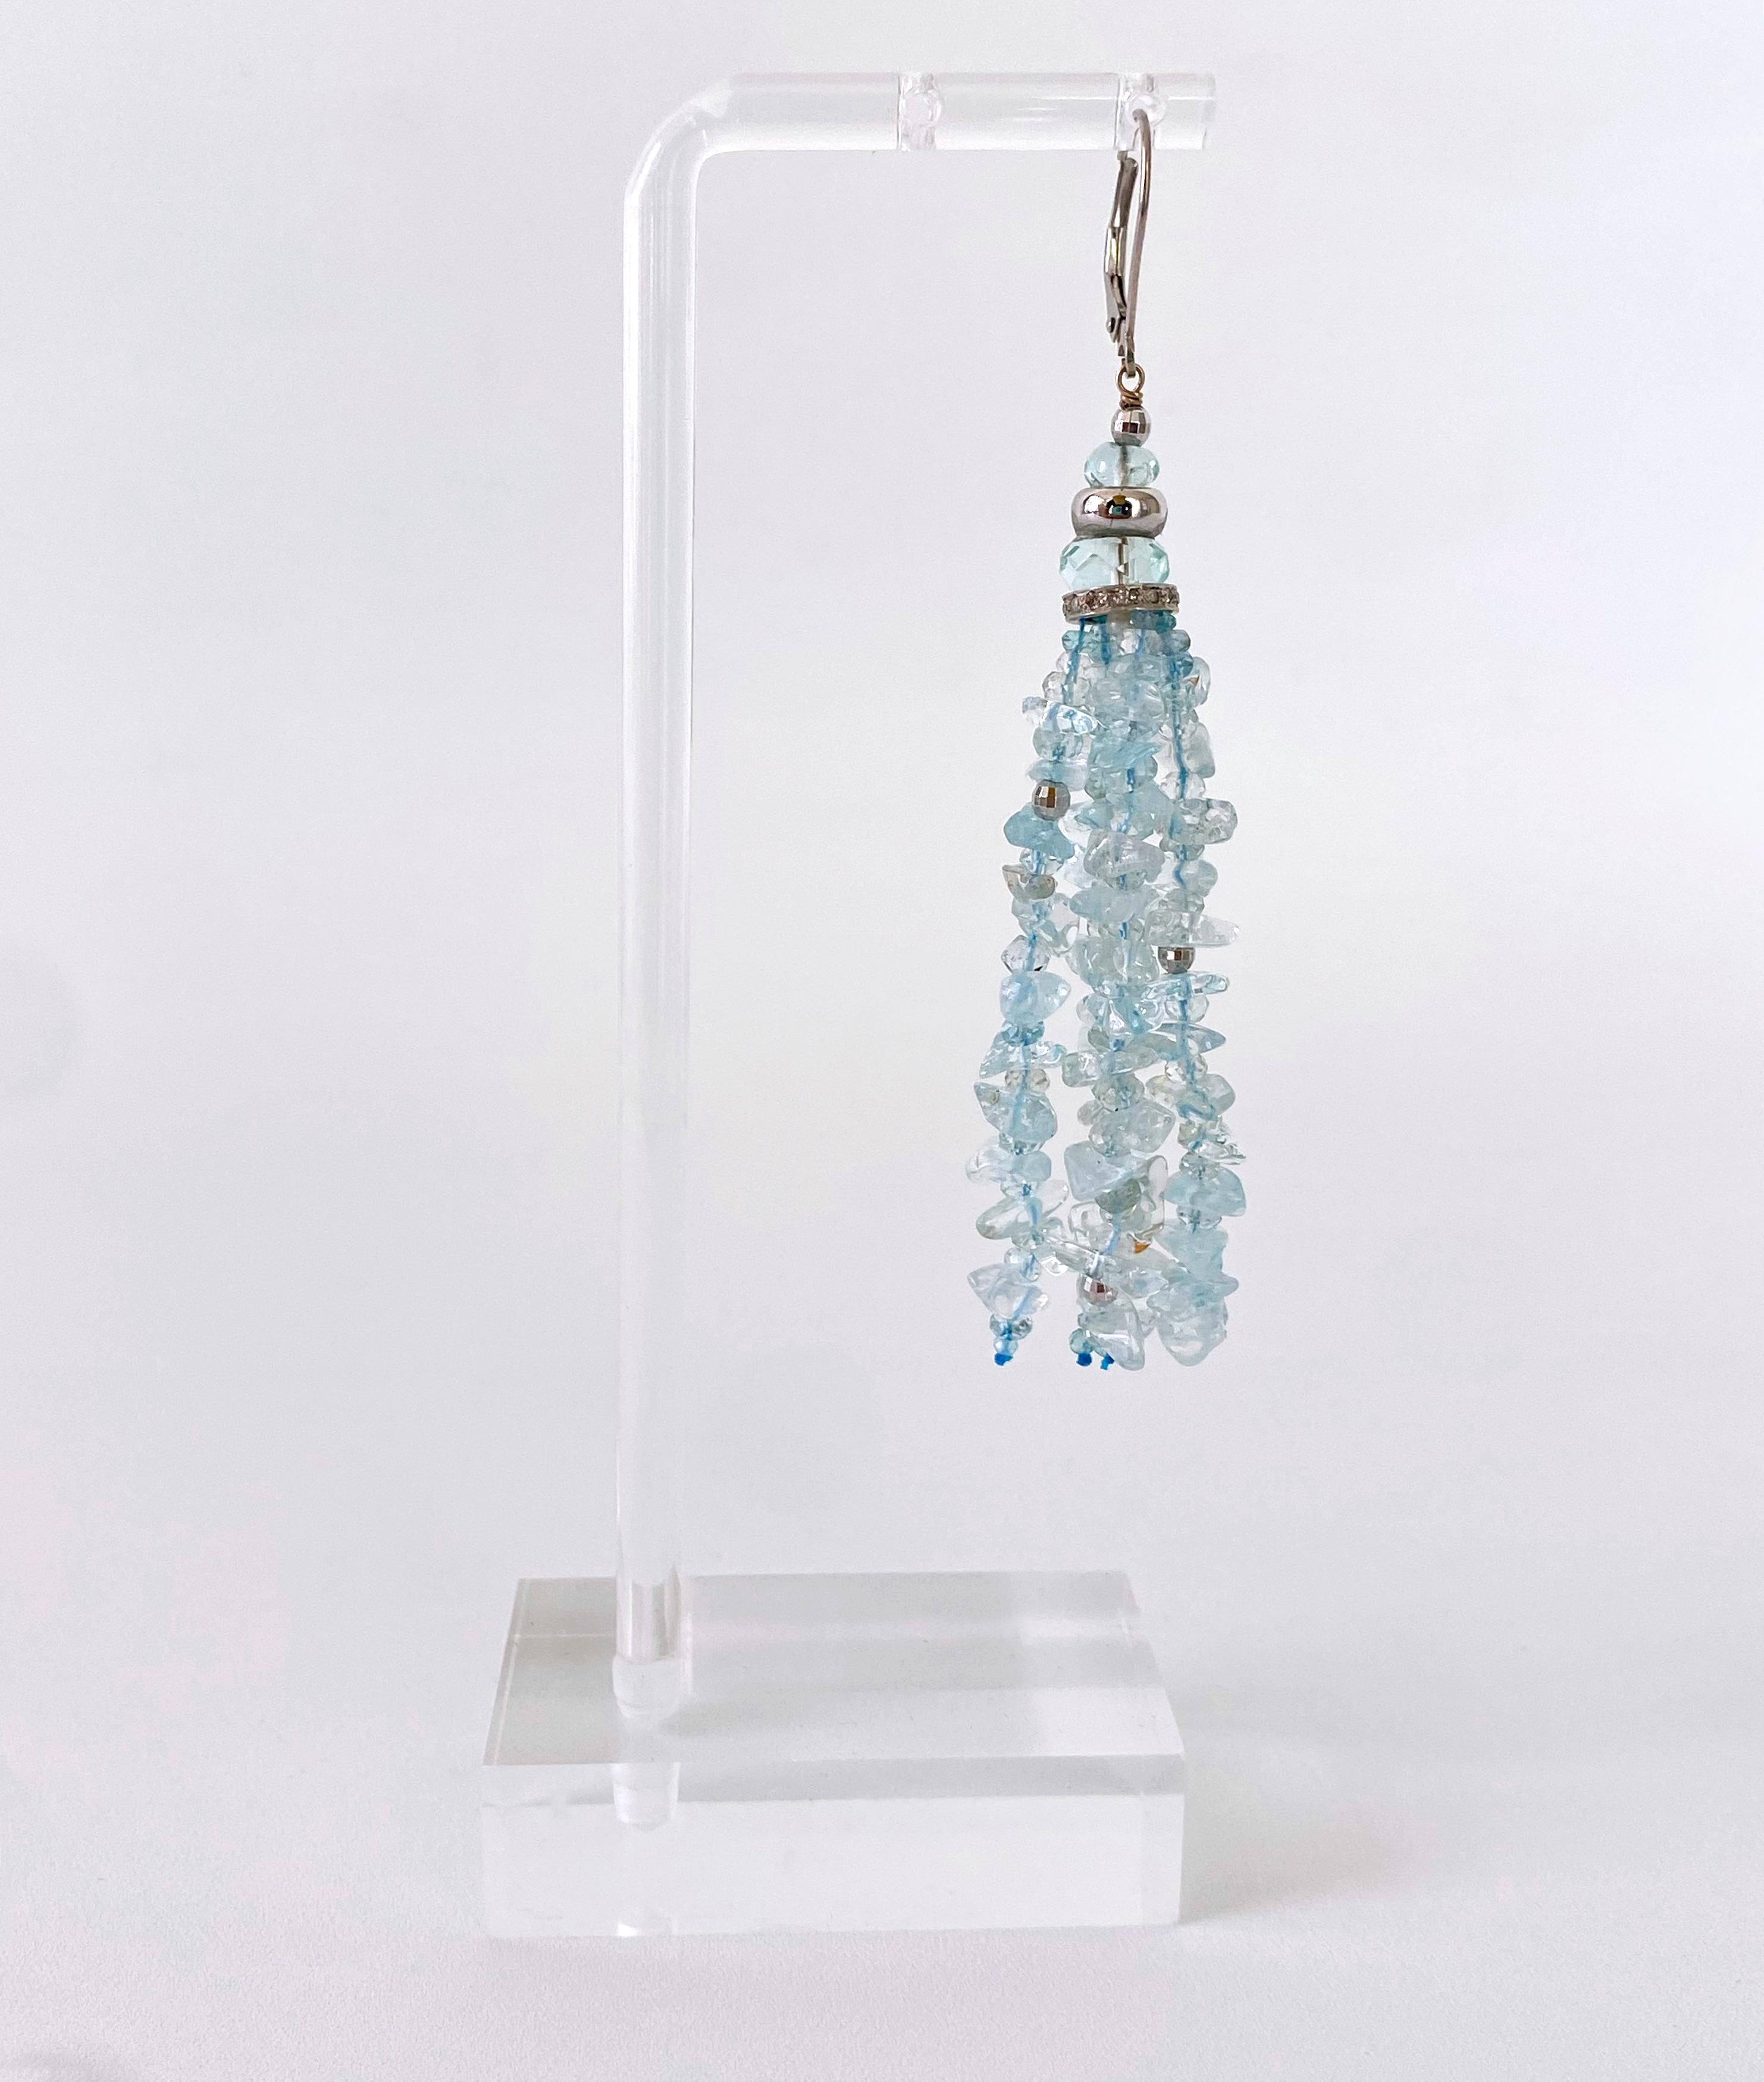 Marina J. Aquamarine Tassel Earrings with 14k White Gold In New Condition For Sale In Los Angeles, CA